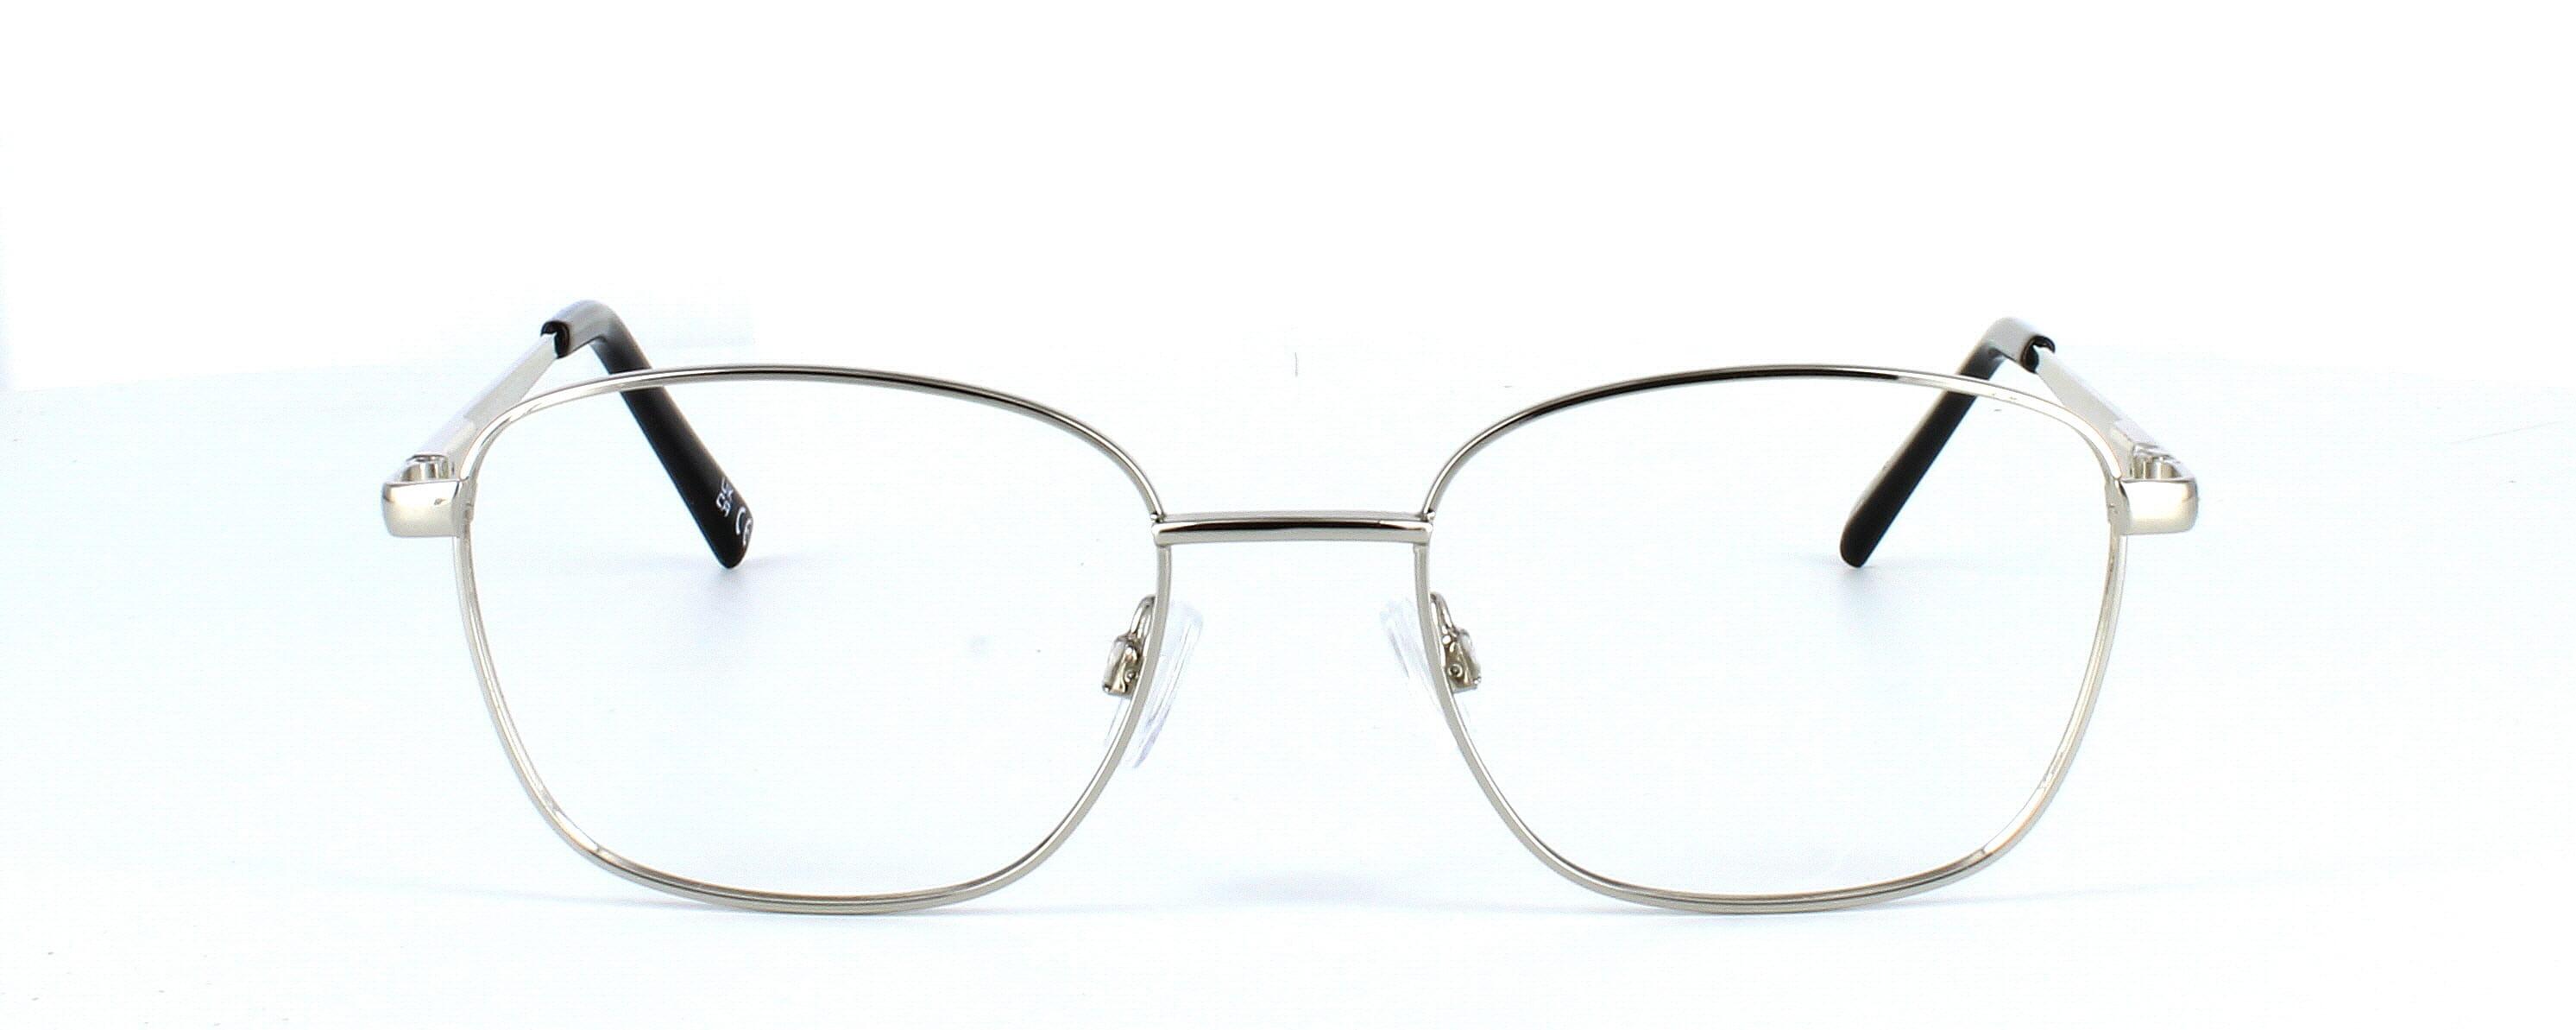 Blanko - Unisex shiny silver metal square shaped glasses with sprung hinge temple - image view 2